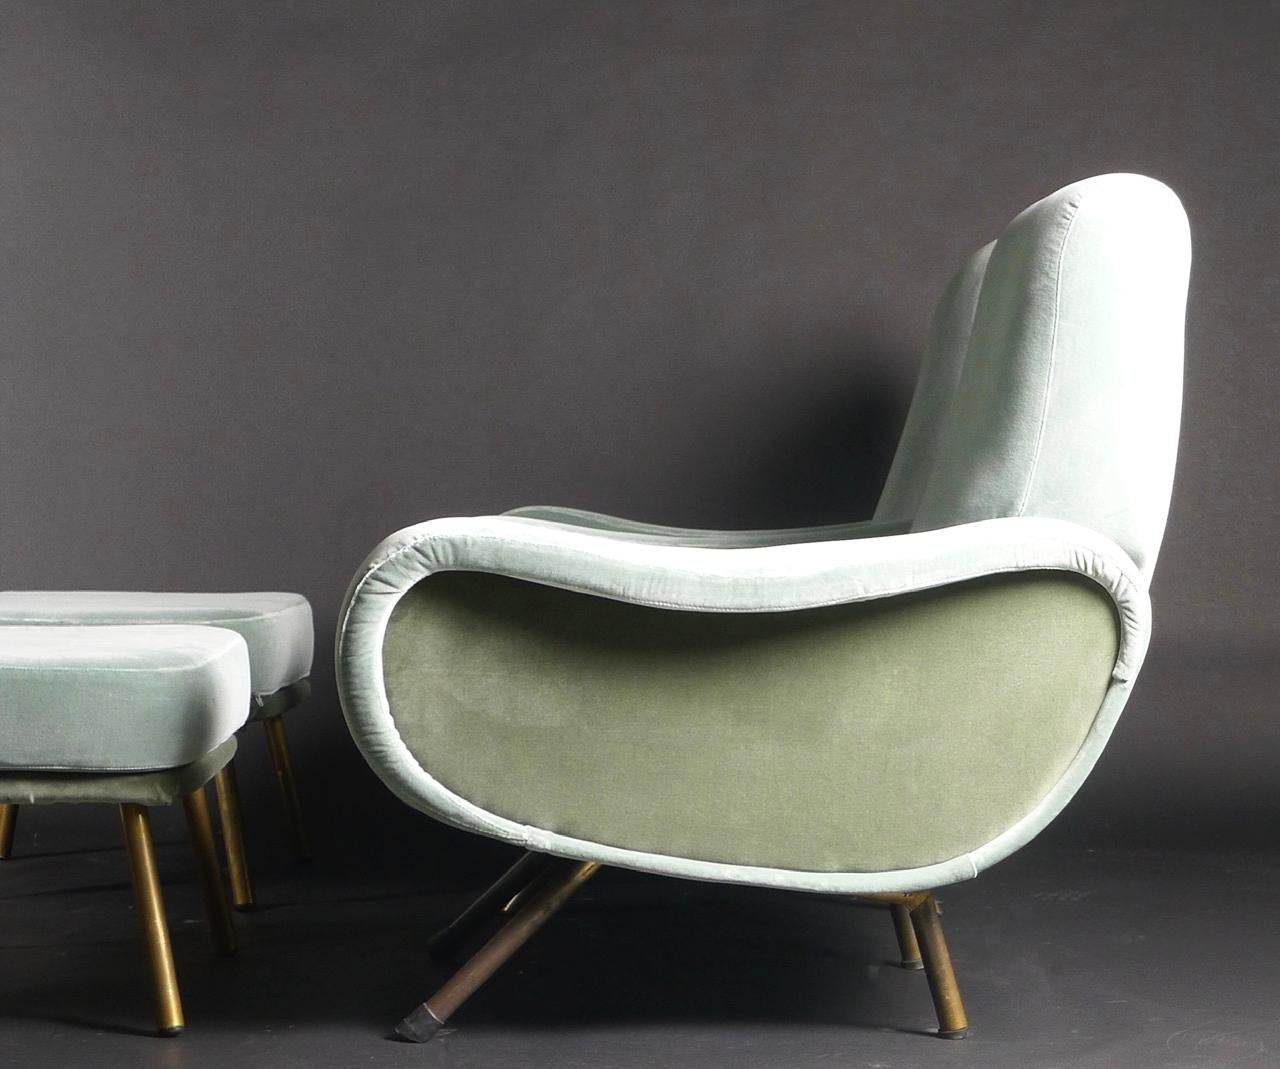 Italian Marco Zanuso, Pair of Lady Chairs and Ottomans, produced by Arflex, Italy 1950s